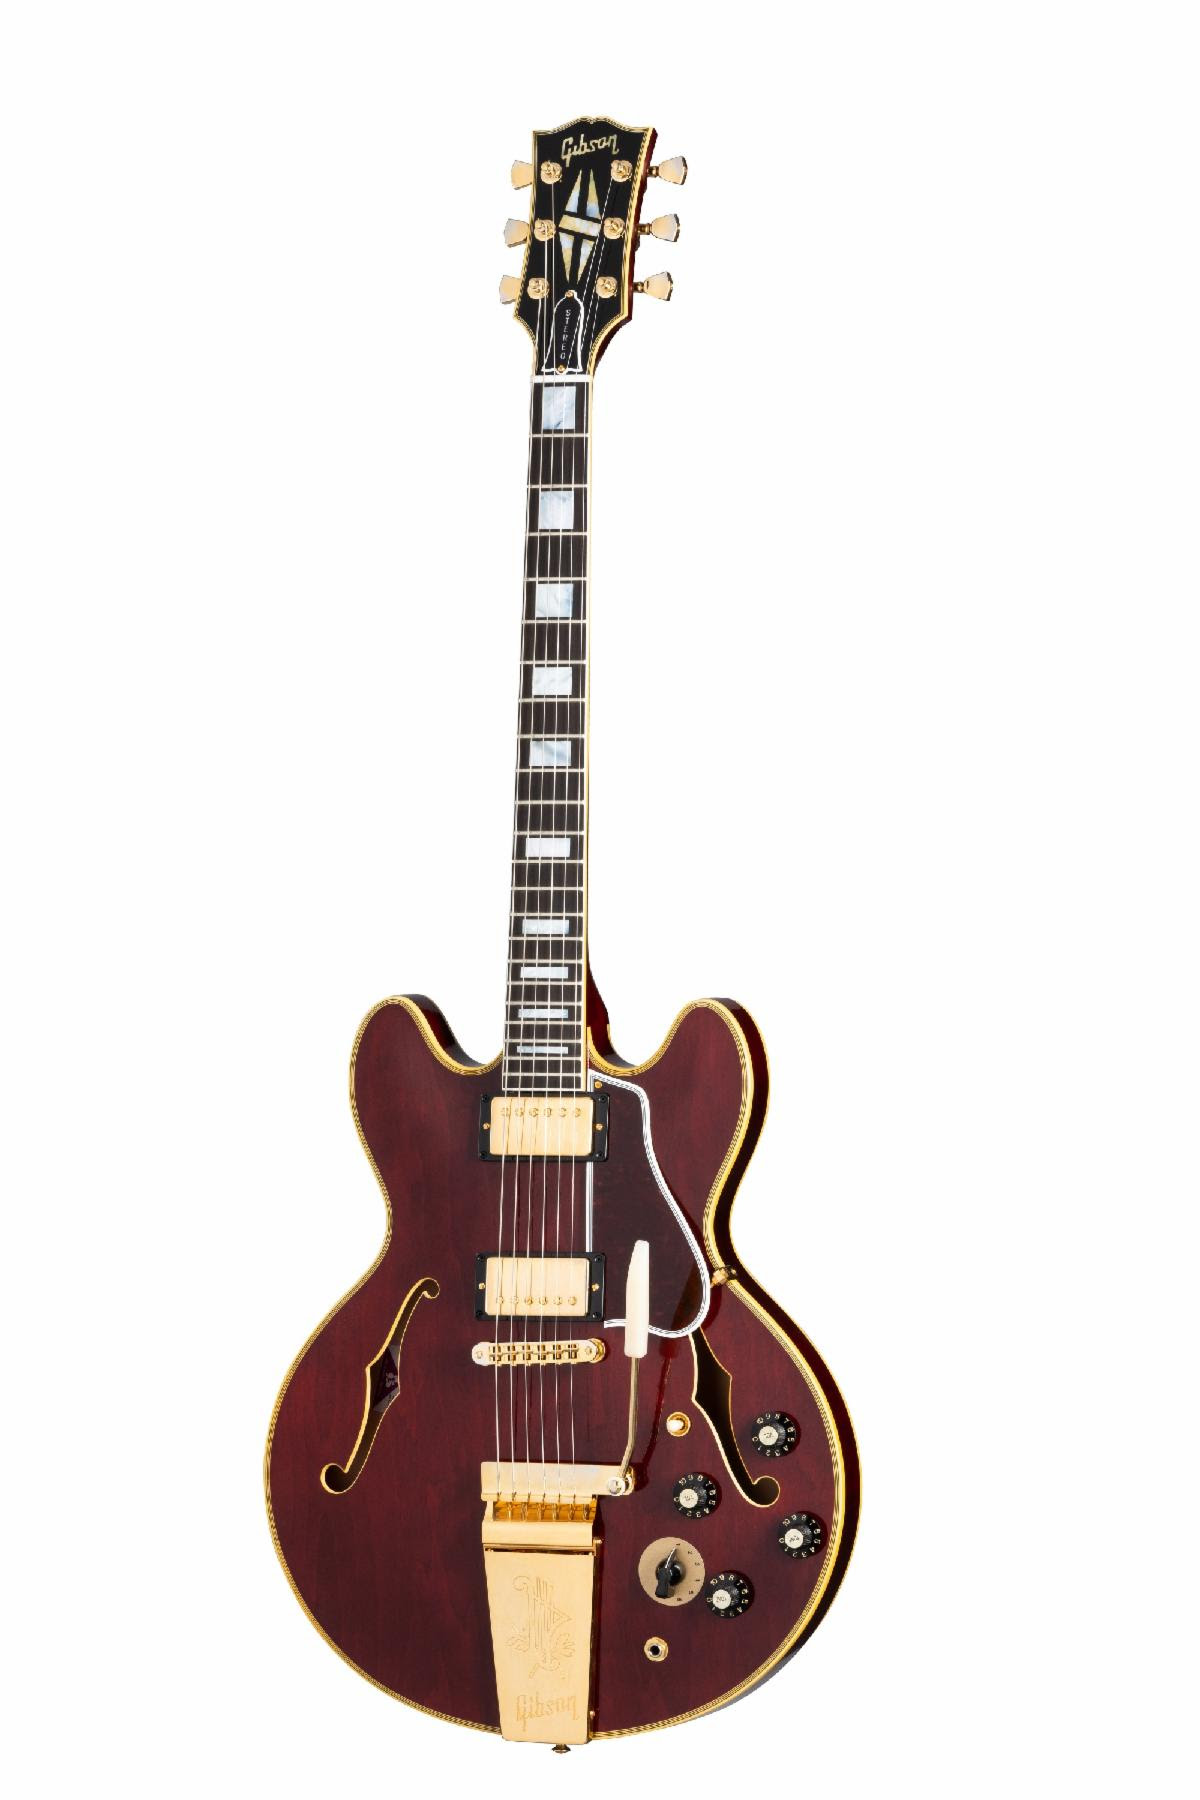 The Gibson Chuck Berry 1970’s ES-355 in Wine Red.